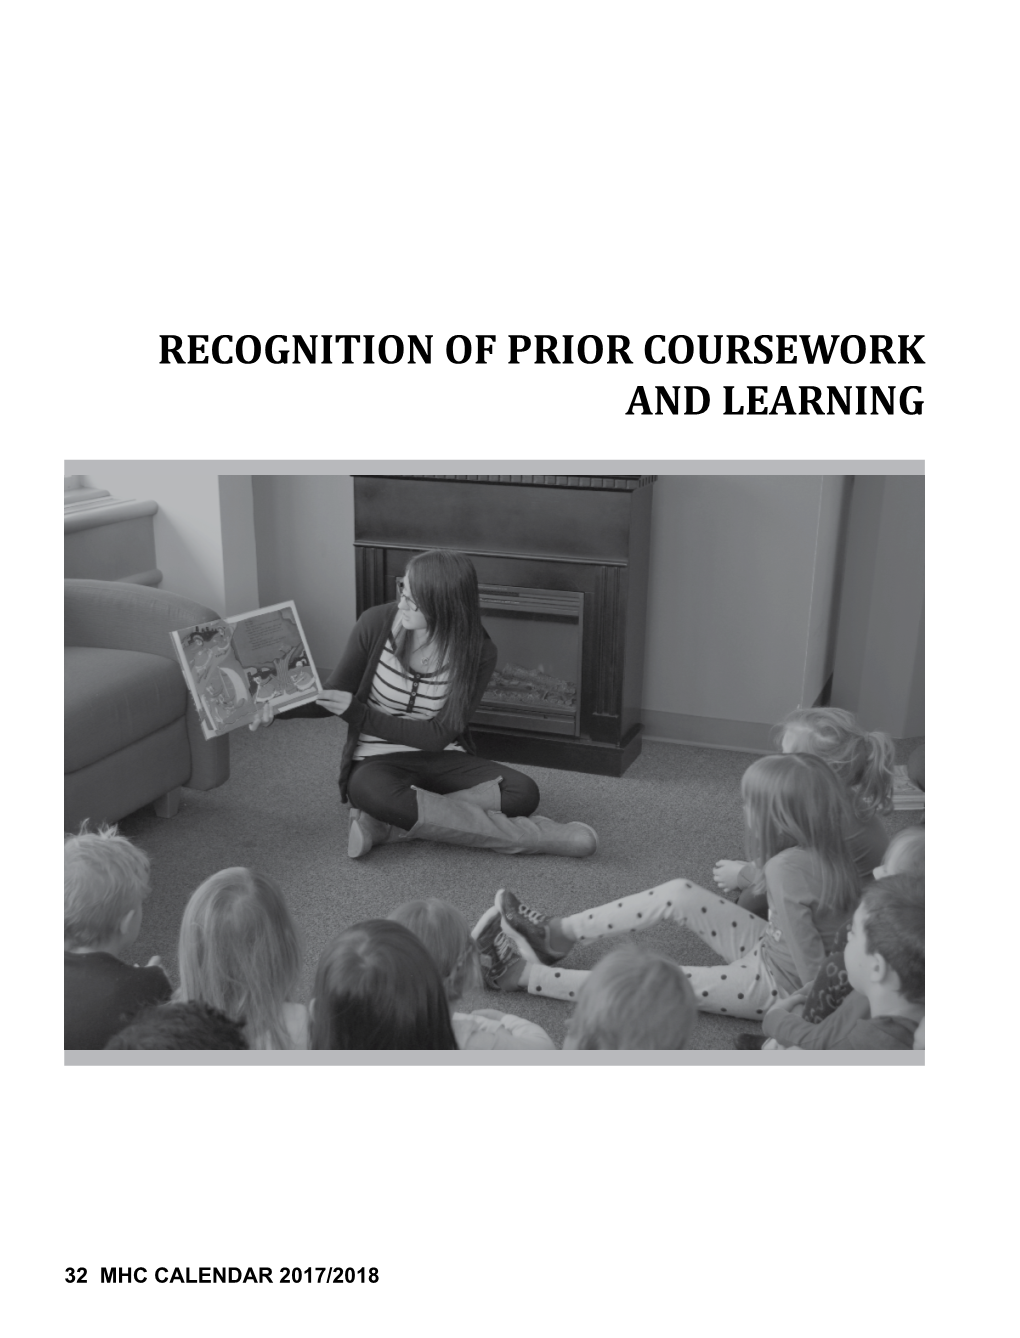 Recognition of Prior Coursework and Learning